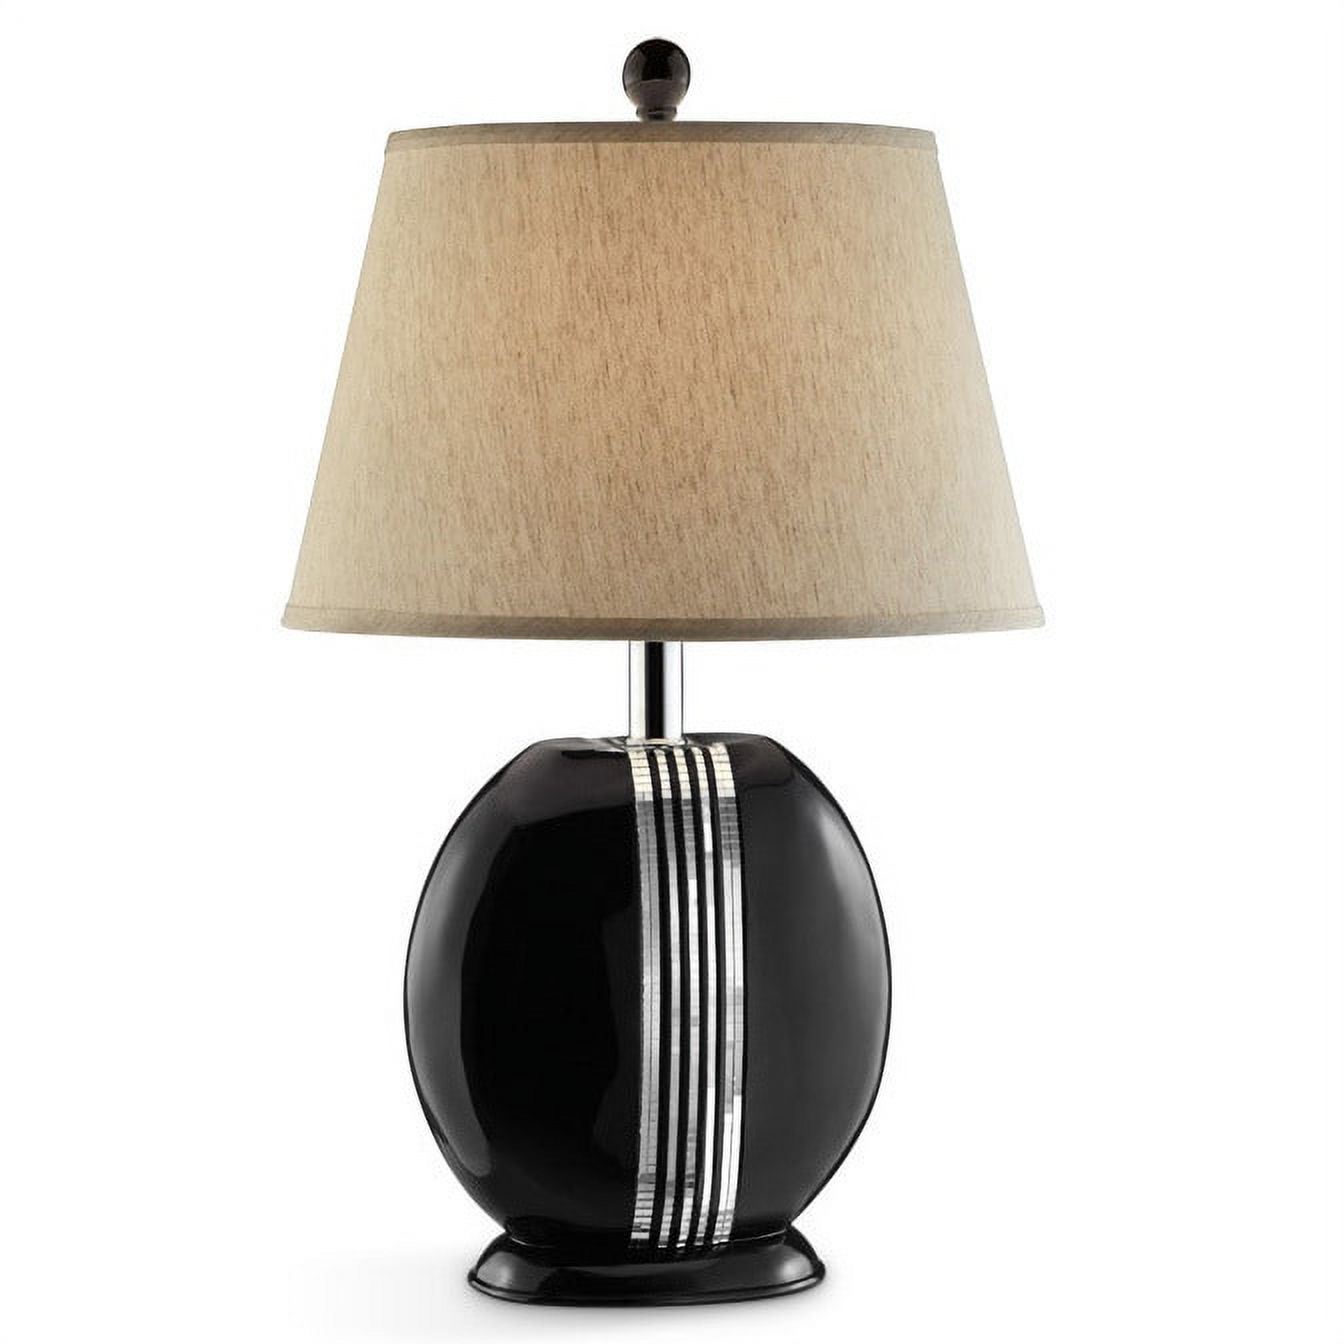 Ore International 28" Obsidian Table Lamp - image 2 of 2